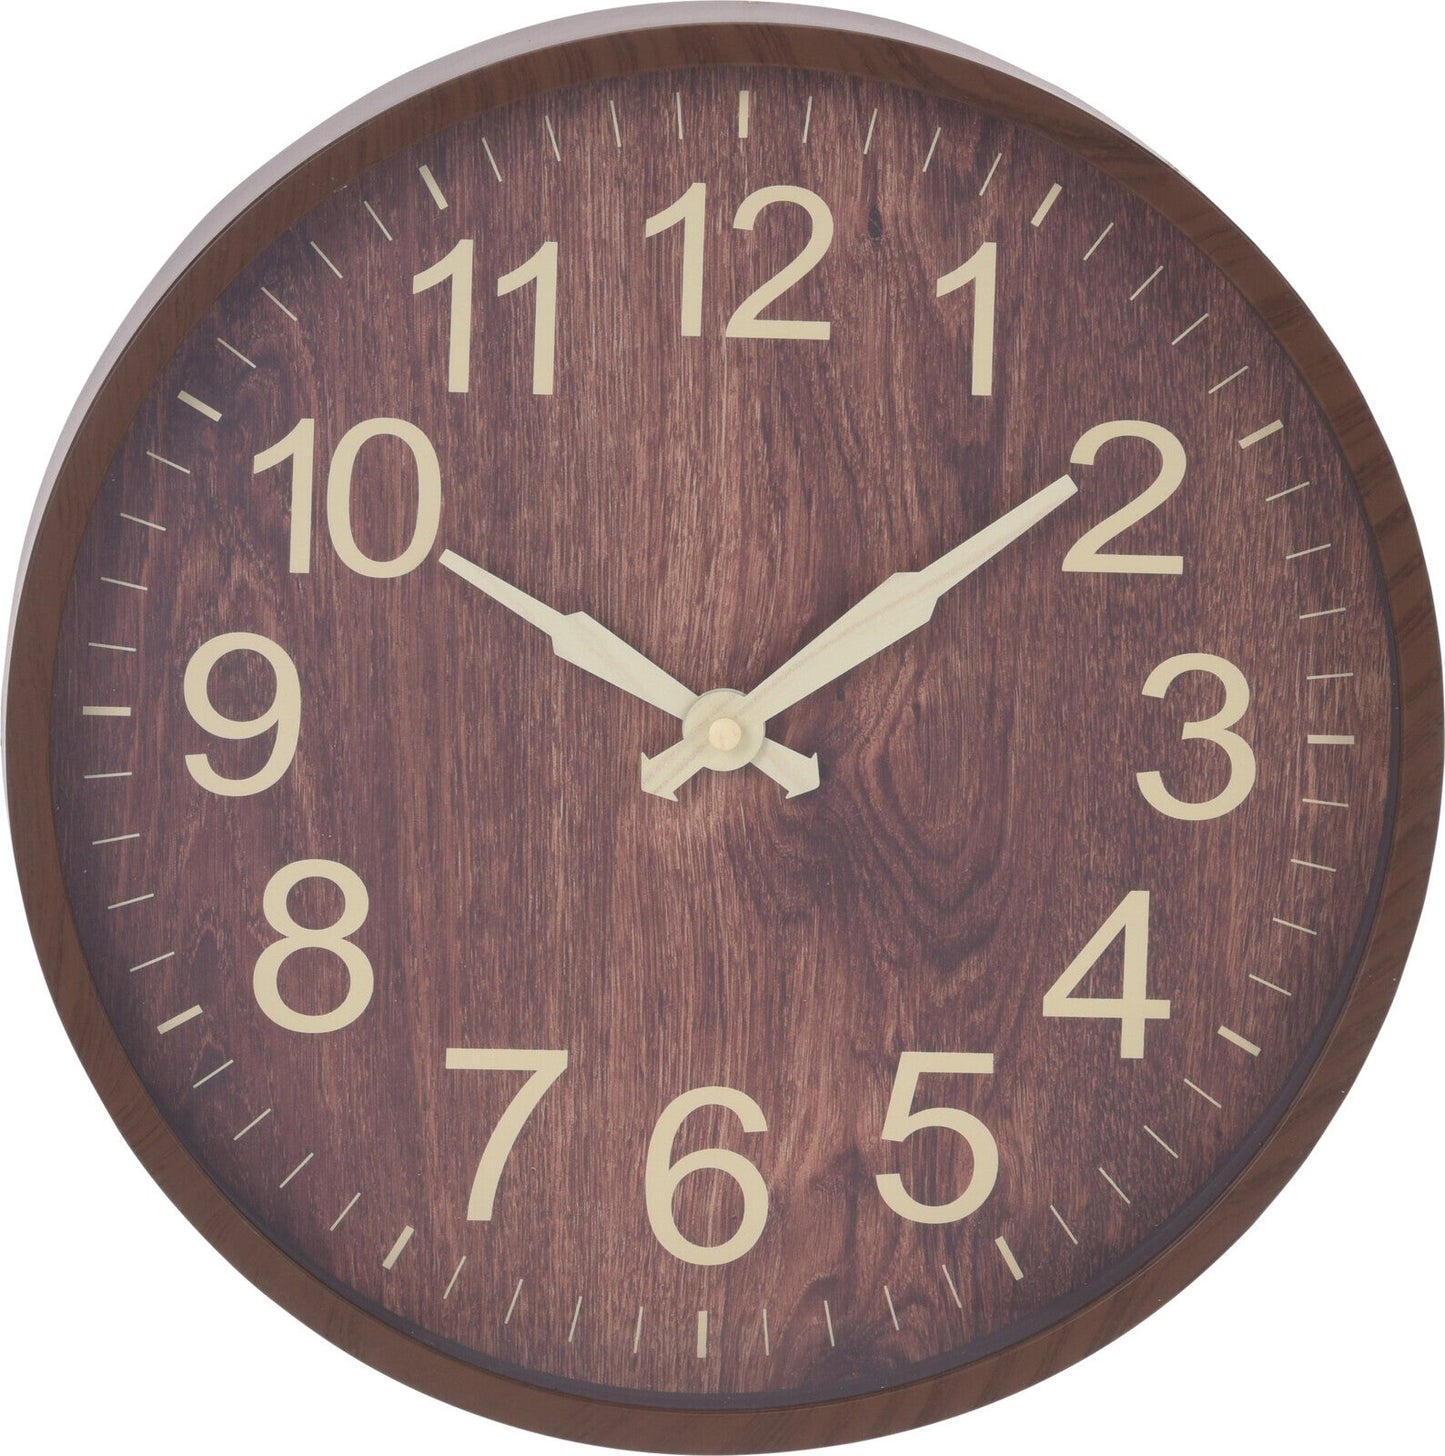 Wall Clock PP, Wood Look, 2 Assorted Colours